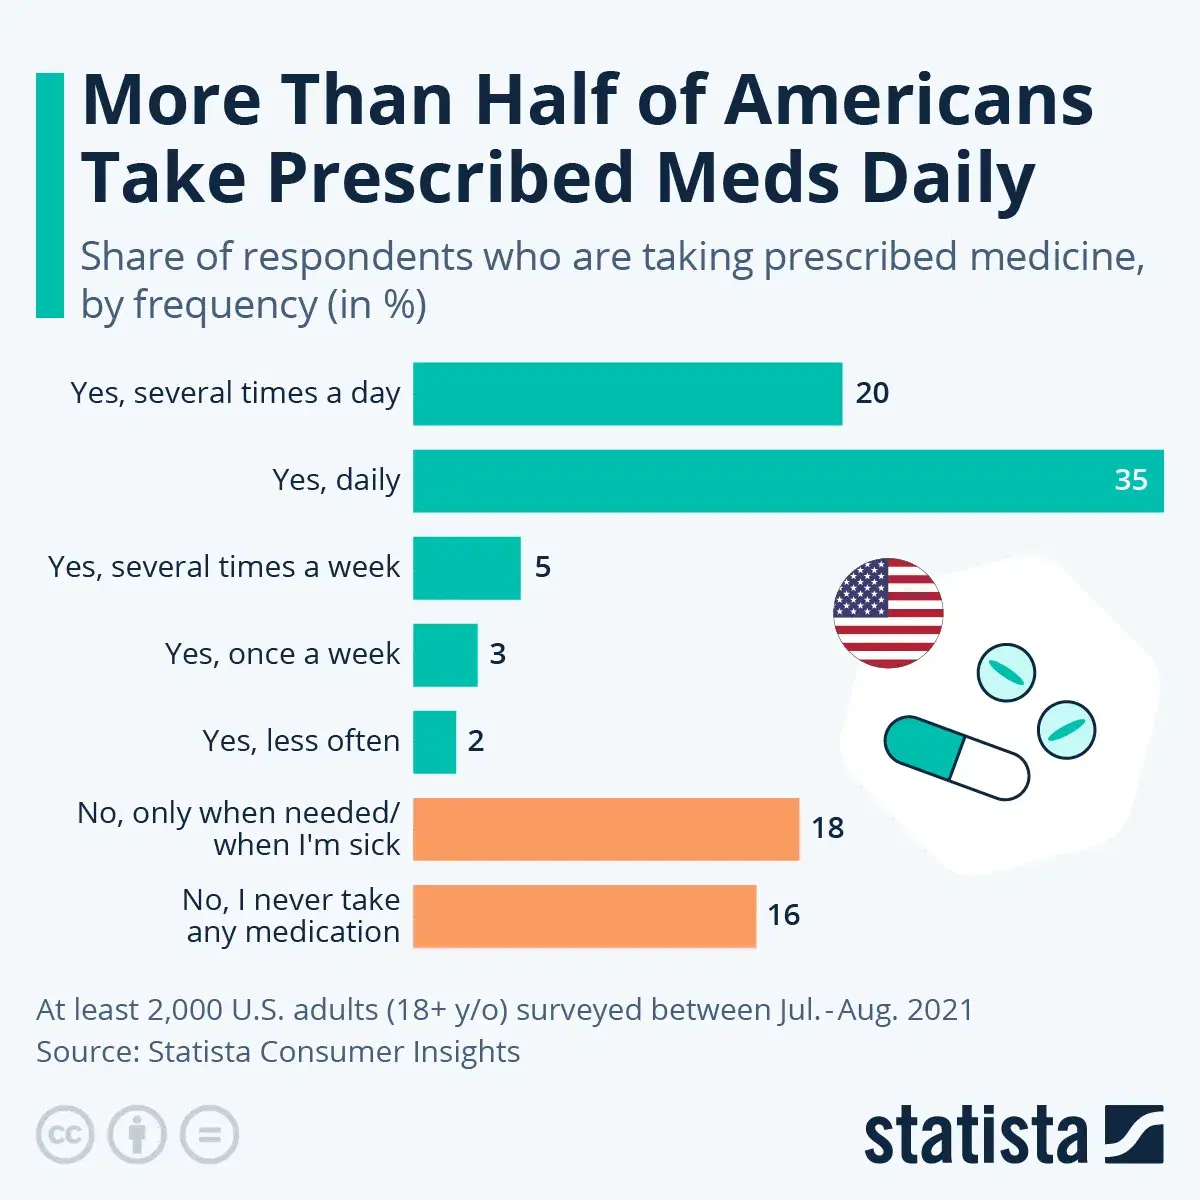 More Than Half of Americans Take Prescribed Meds Daily